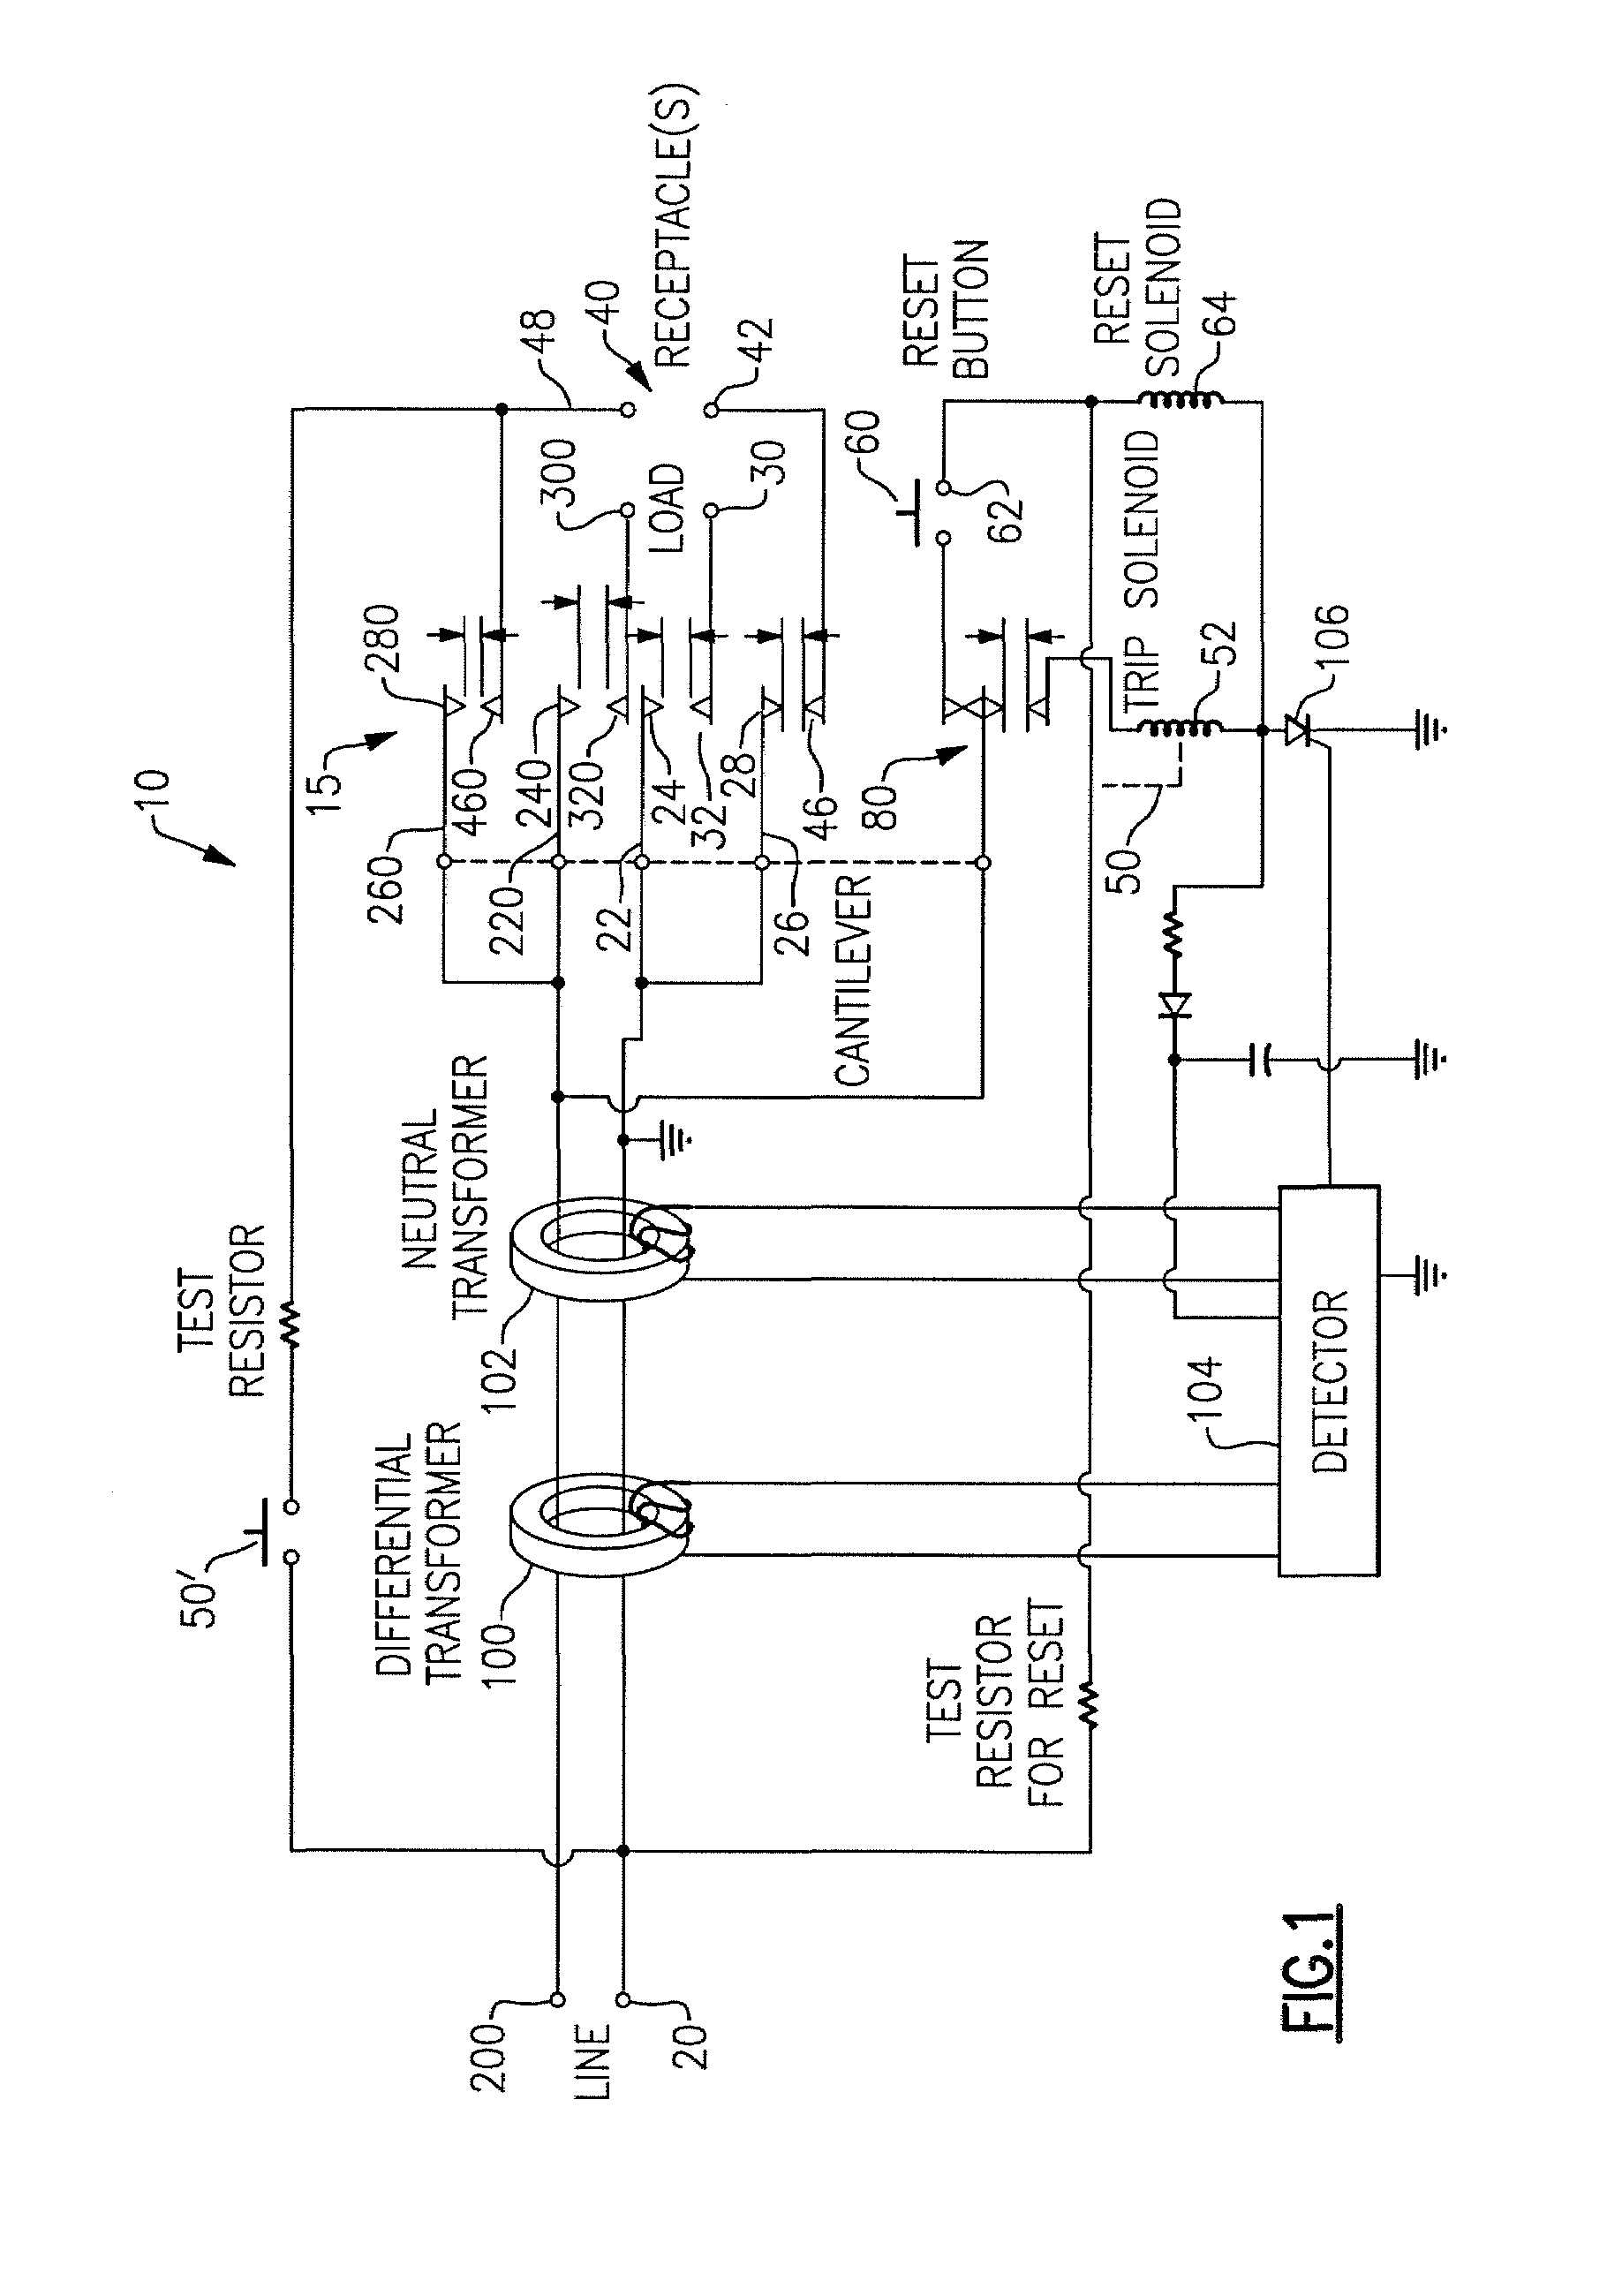 Protection device with power to receptacle cut-off